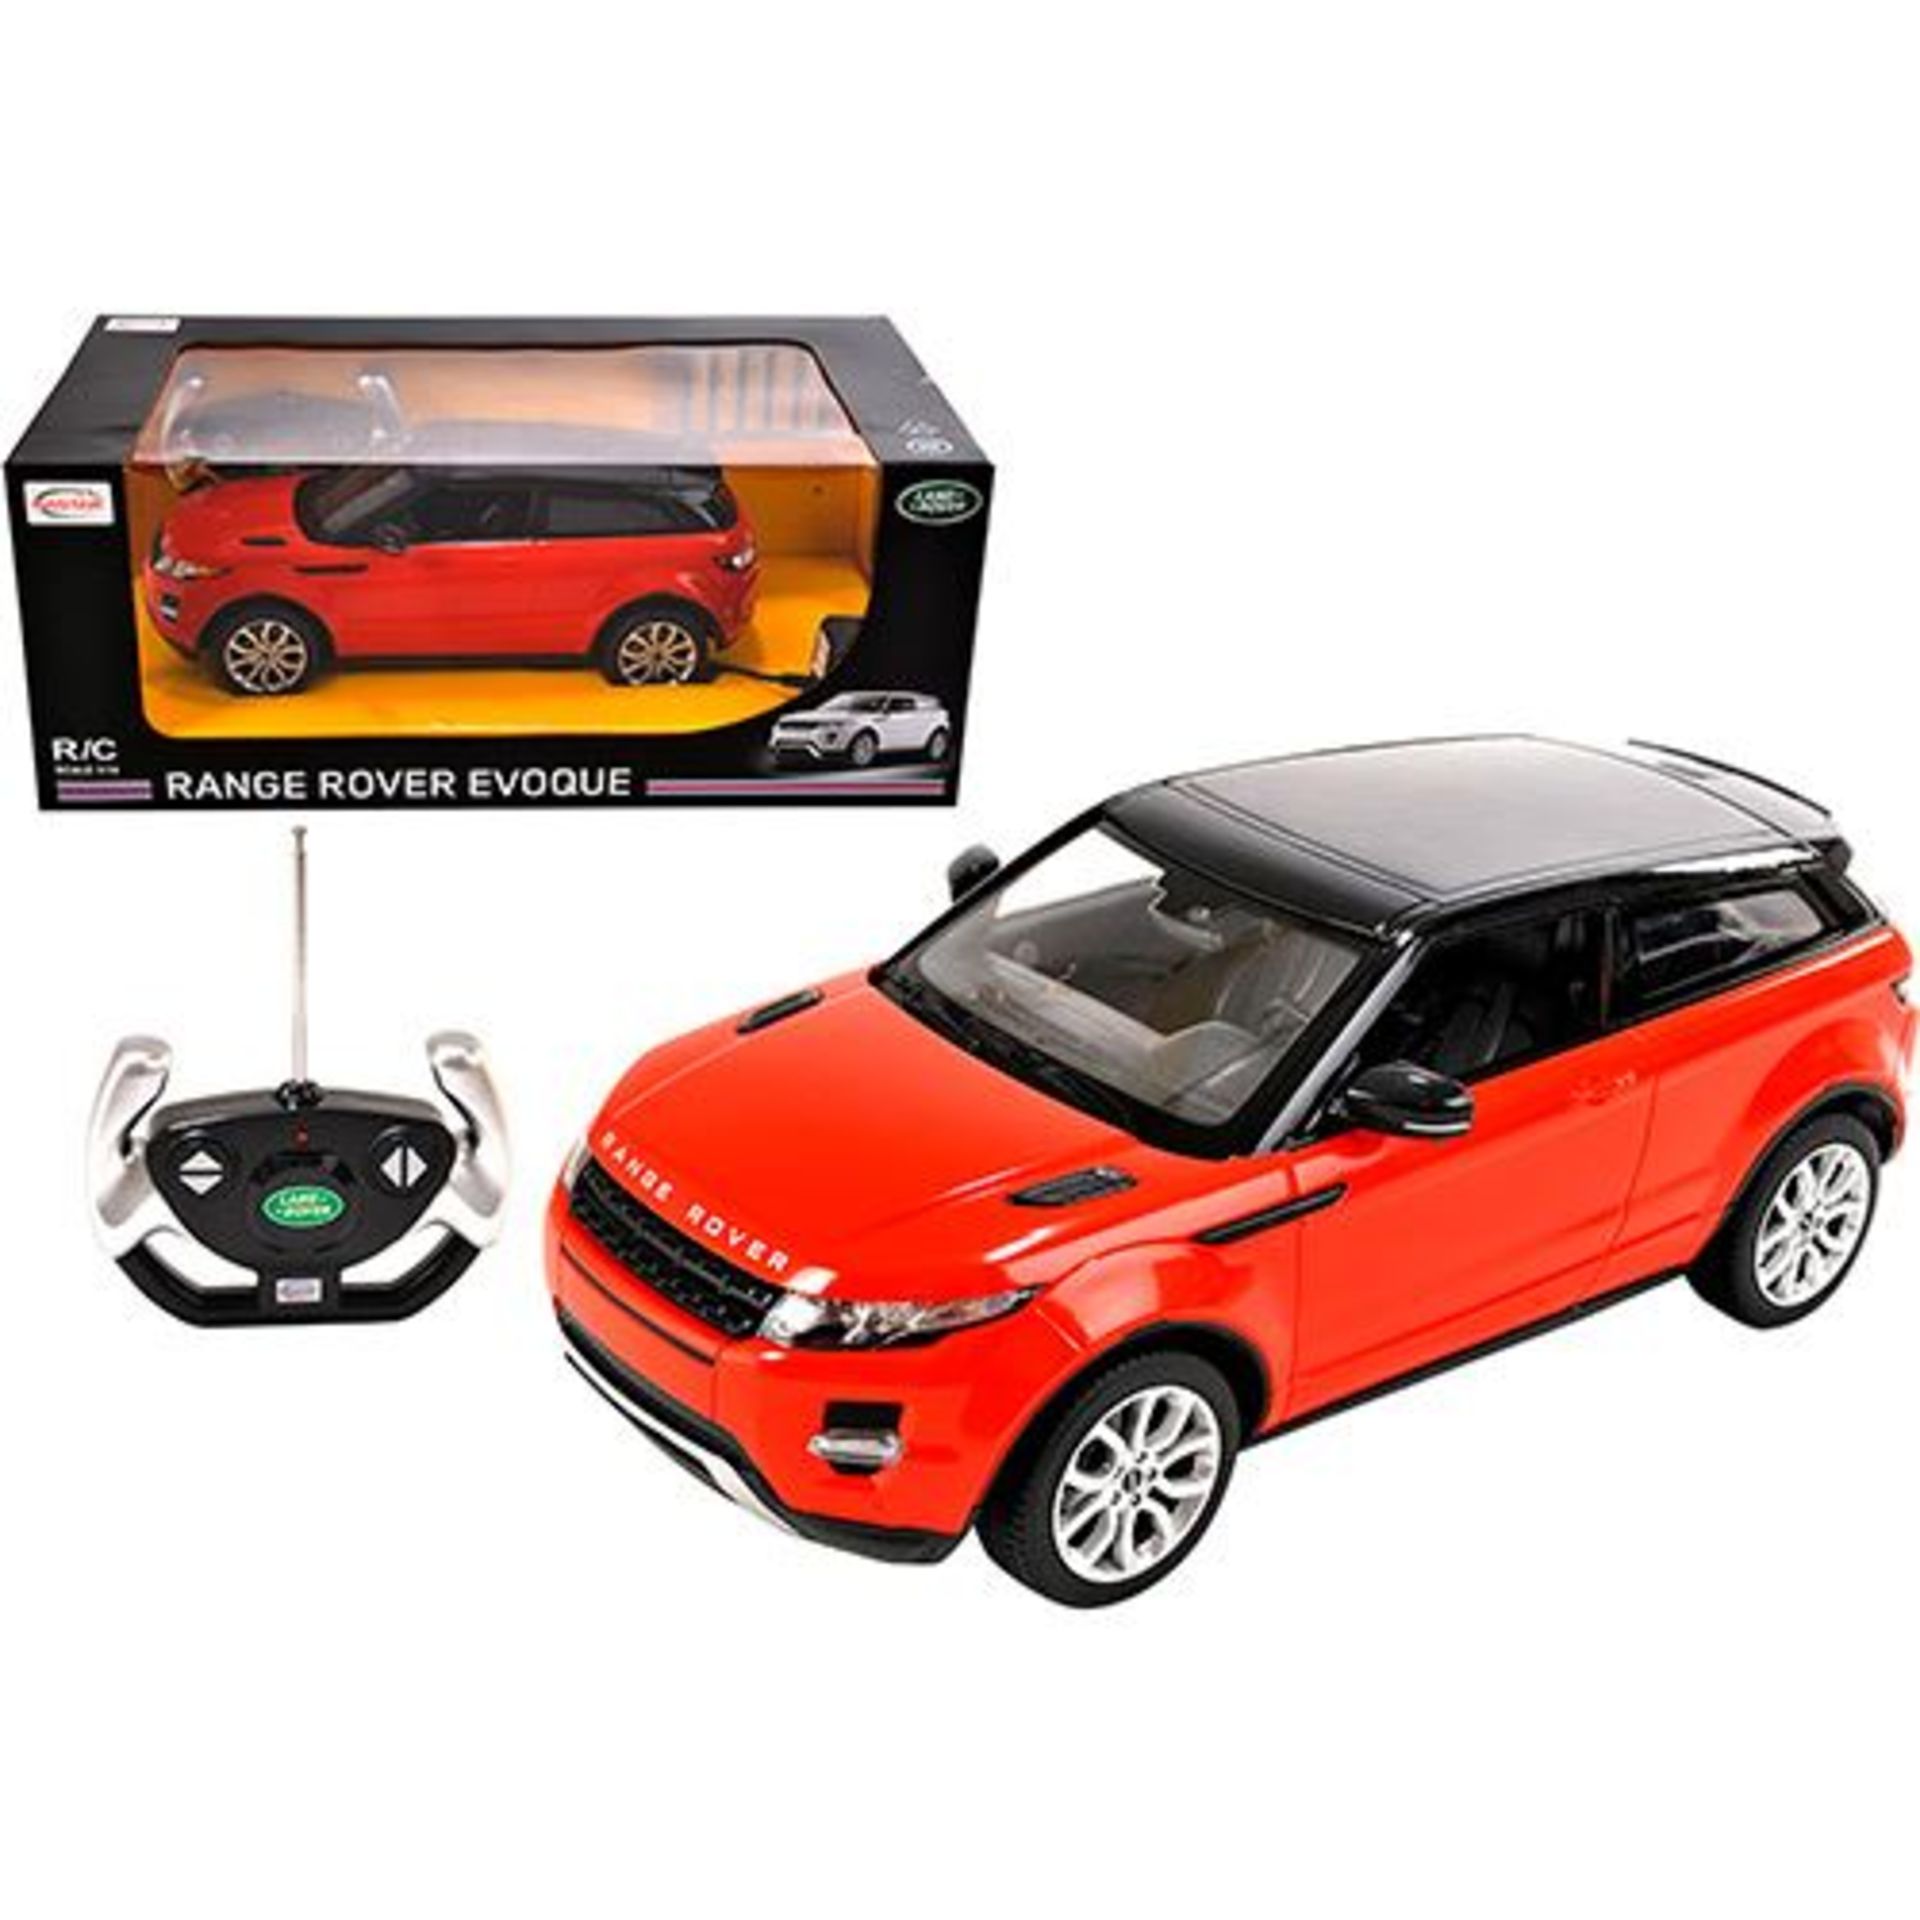 V *TRADE QTY* Brand New 1:14 Scale R/C Range Rover Evoque SRP49.99 Various Colours X 5 YOUR BID - Image 2 of 2